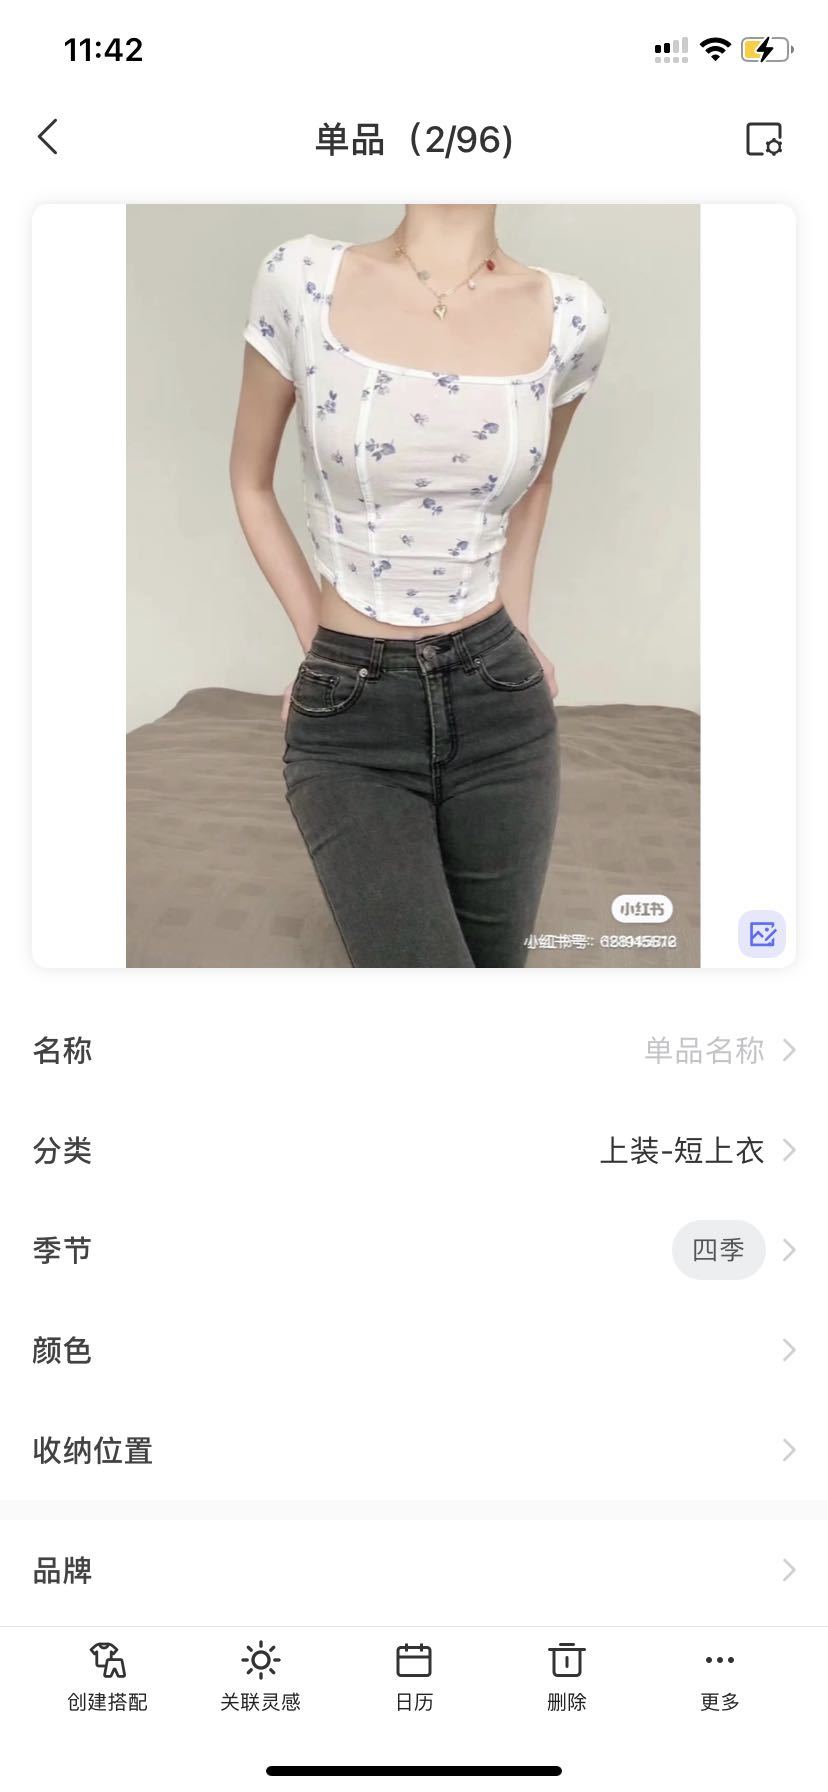 https://img1.superbuy.com/images/consult/2022/07/14/89639a7bf2212aa5ef984cd3e751fced.jpg?x-oss-process=image/resize,w_950